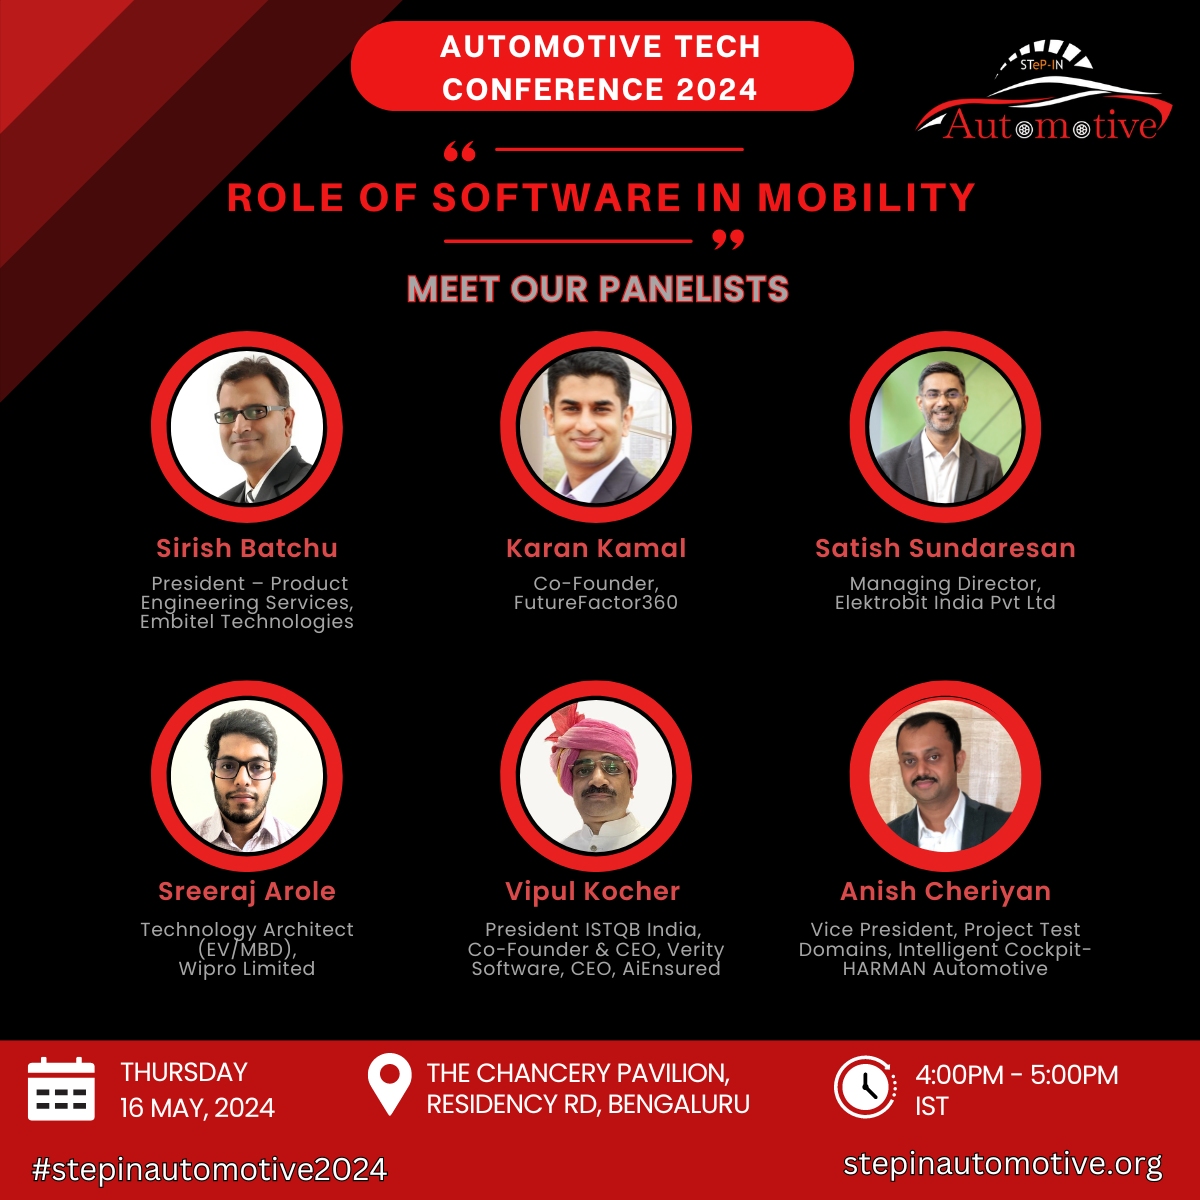 🌟 Introducing our esteemed panelists for the upcoming panel session at #STEPINAUTOMOTIVE2024 on the '𝐑𝐨𝐥𝐞 𝐨𝐟 𝐒𝐨𝐟𝐭𝐰𝐚𝐫𝐞 𝐢𝐧 𝐌𝐨𝐛𝐢𝐥𝐢𝐭𝐲.' 🚀

#AutomotiveTech #ExpertPanel #SoftwareMobility #Conference